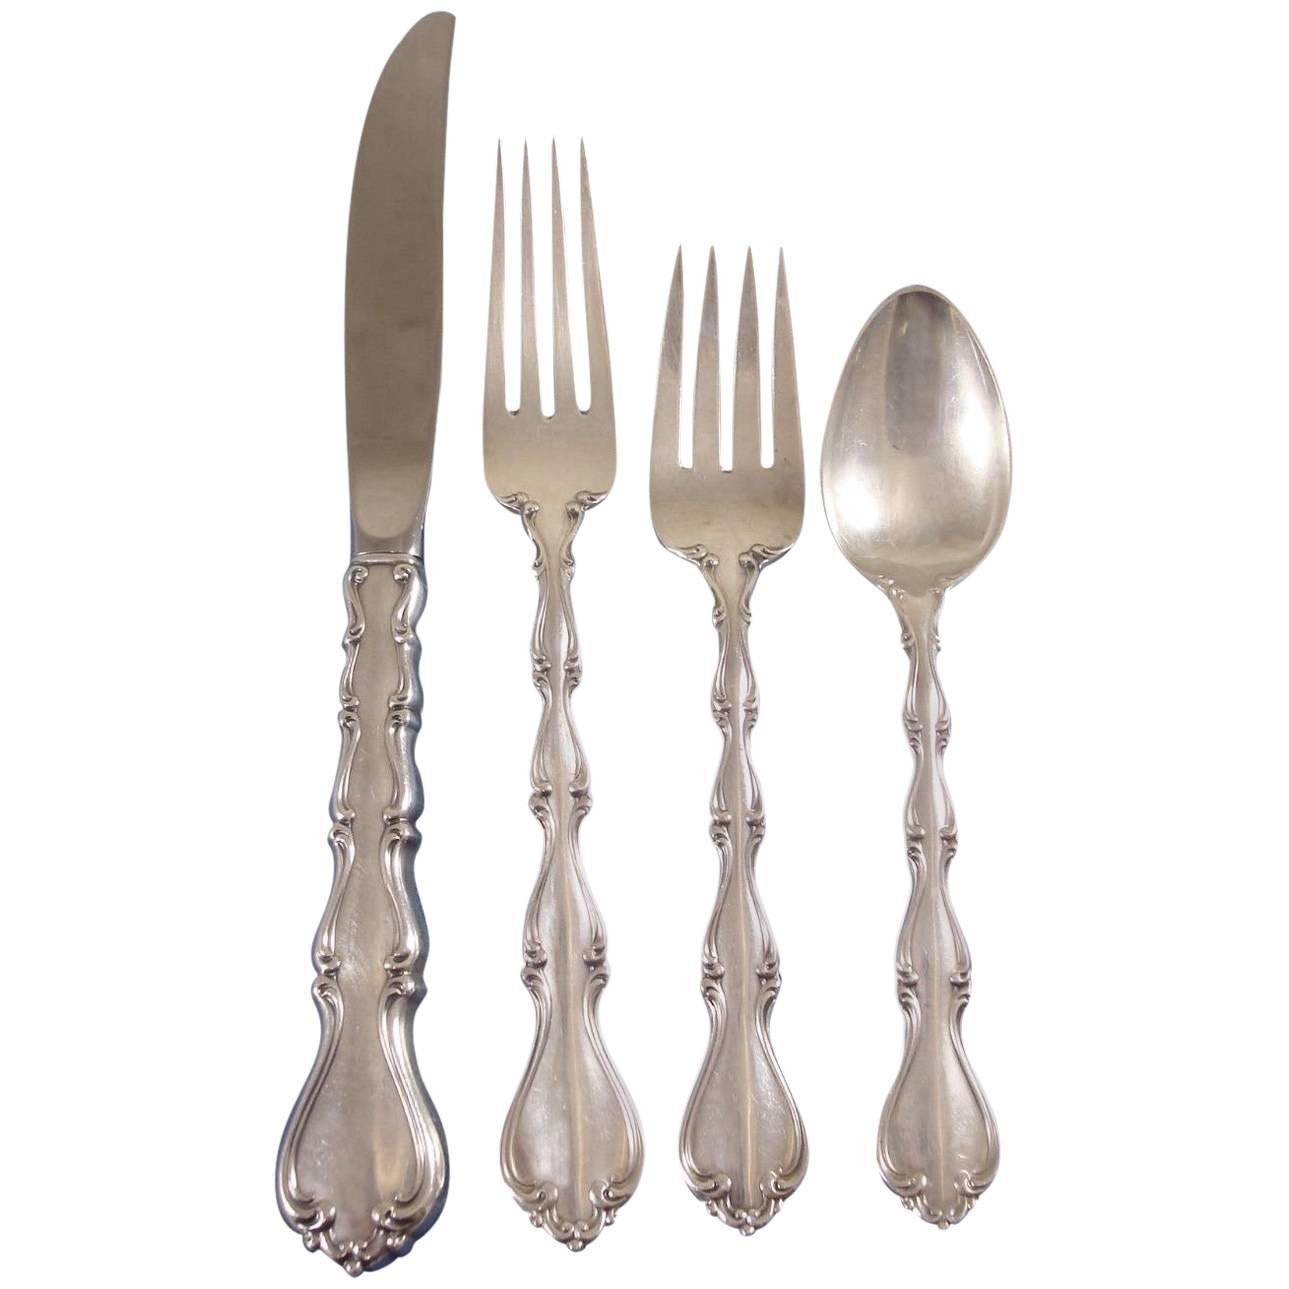 Country Manor by Towle Sterling Silver Flatware Service Set 32 Pieces